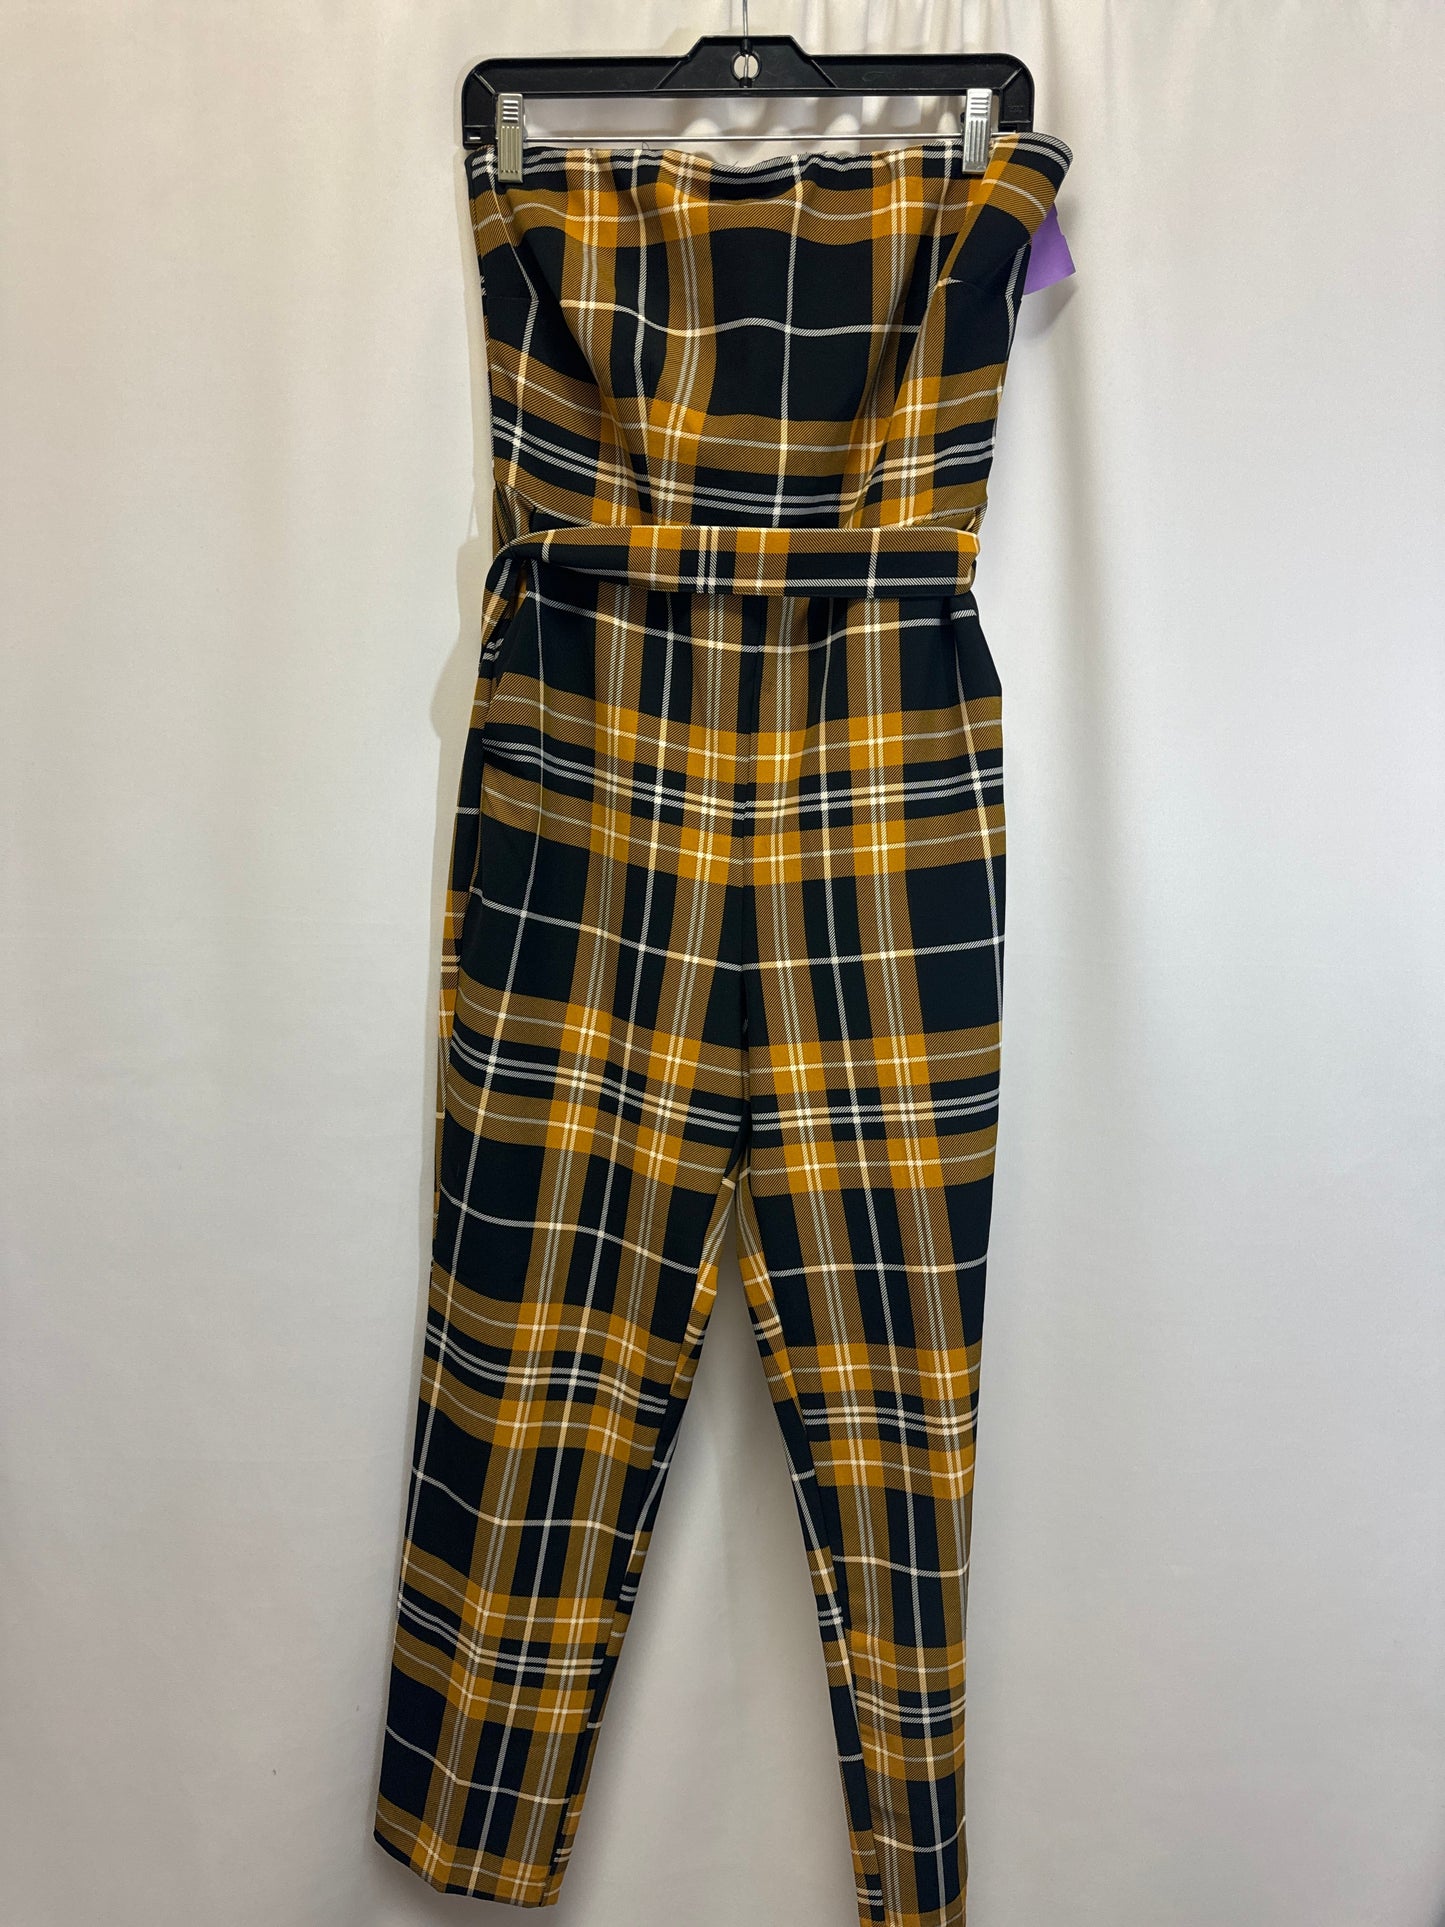 Black & Yellow Jumpsuit New York And Co, Size S